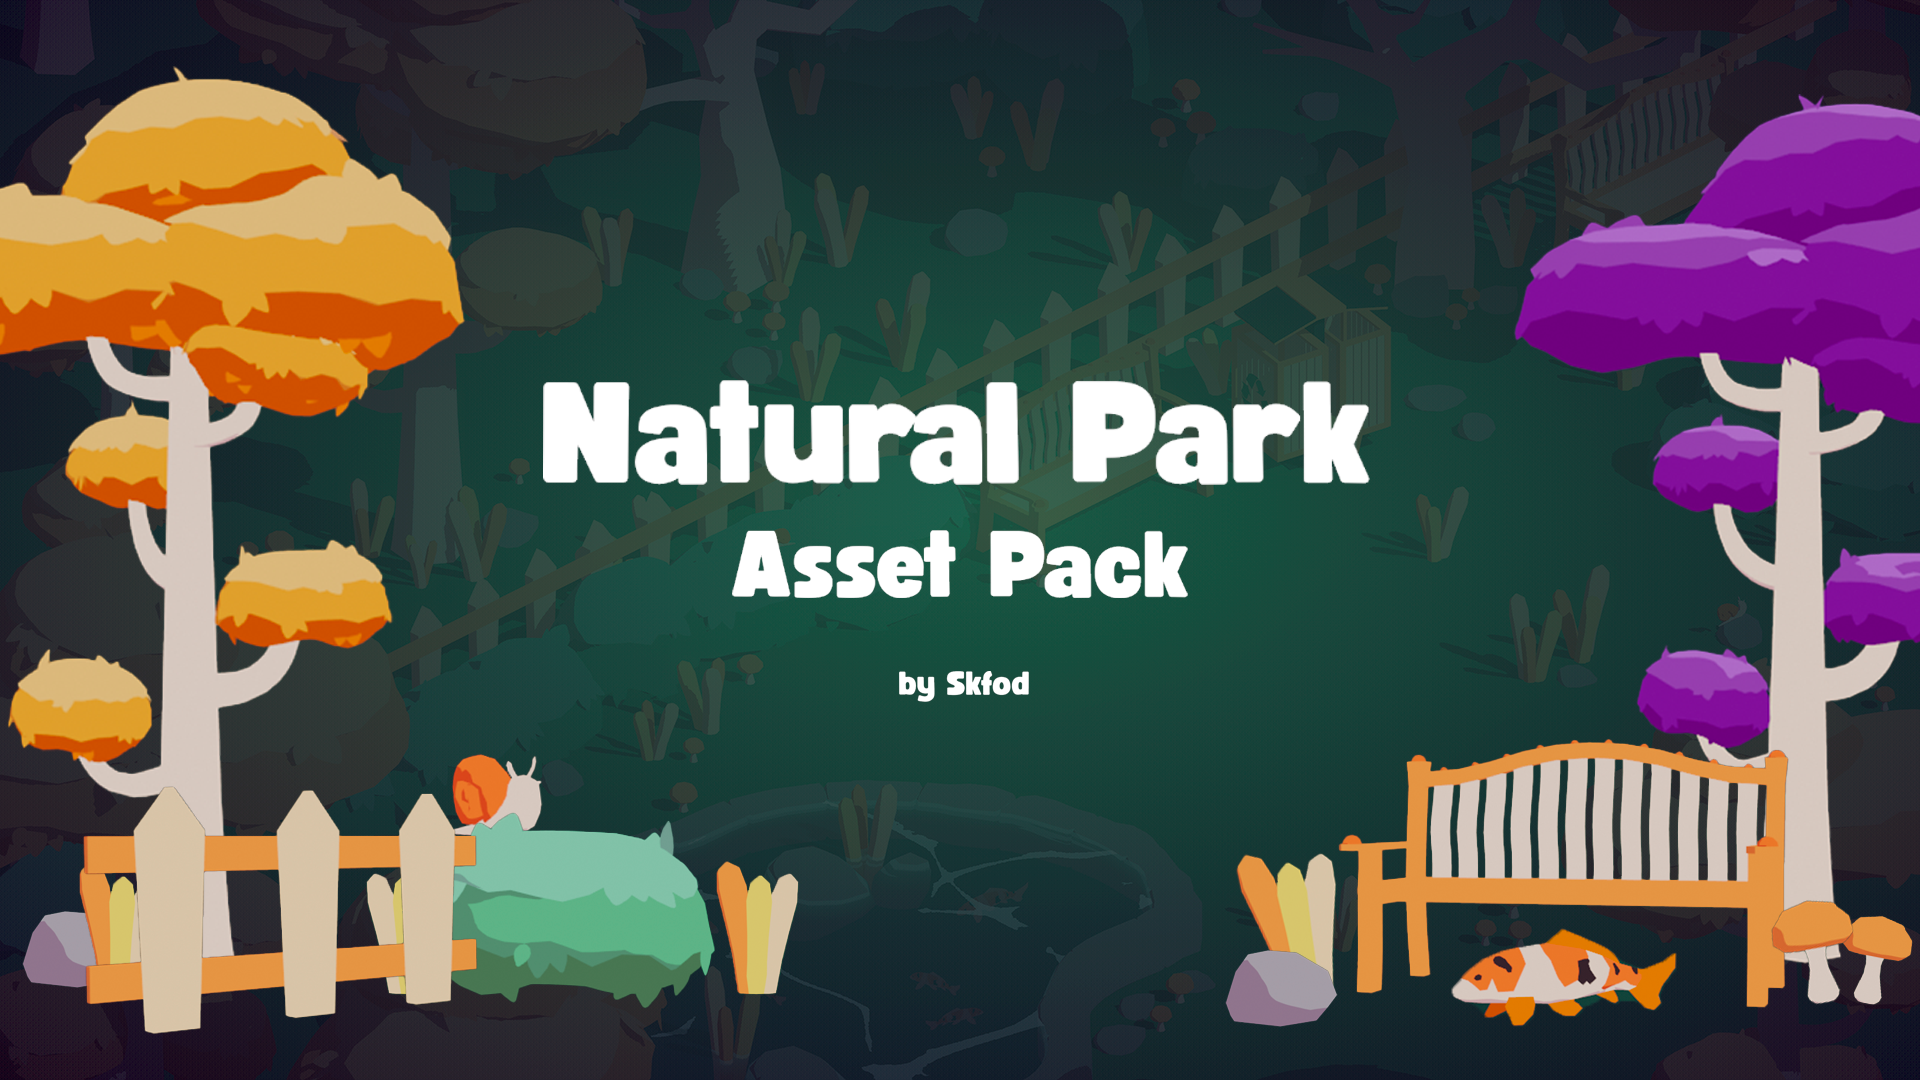 Low Poly Asset Pack - Natural Park